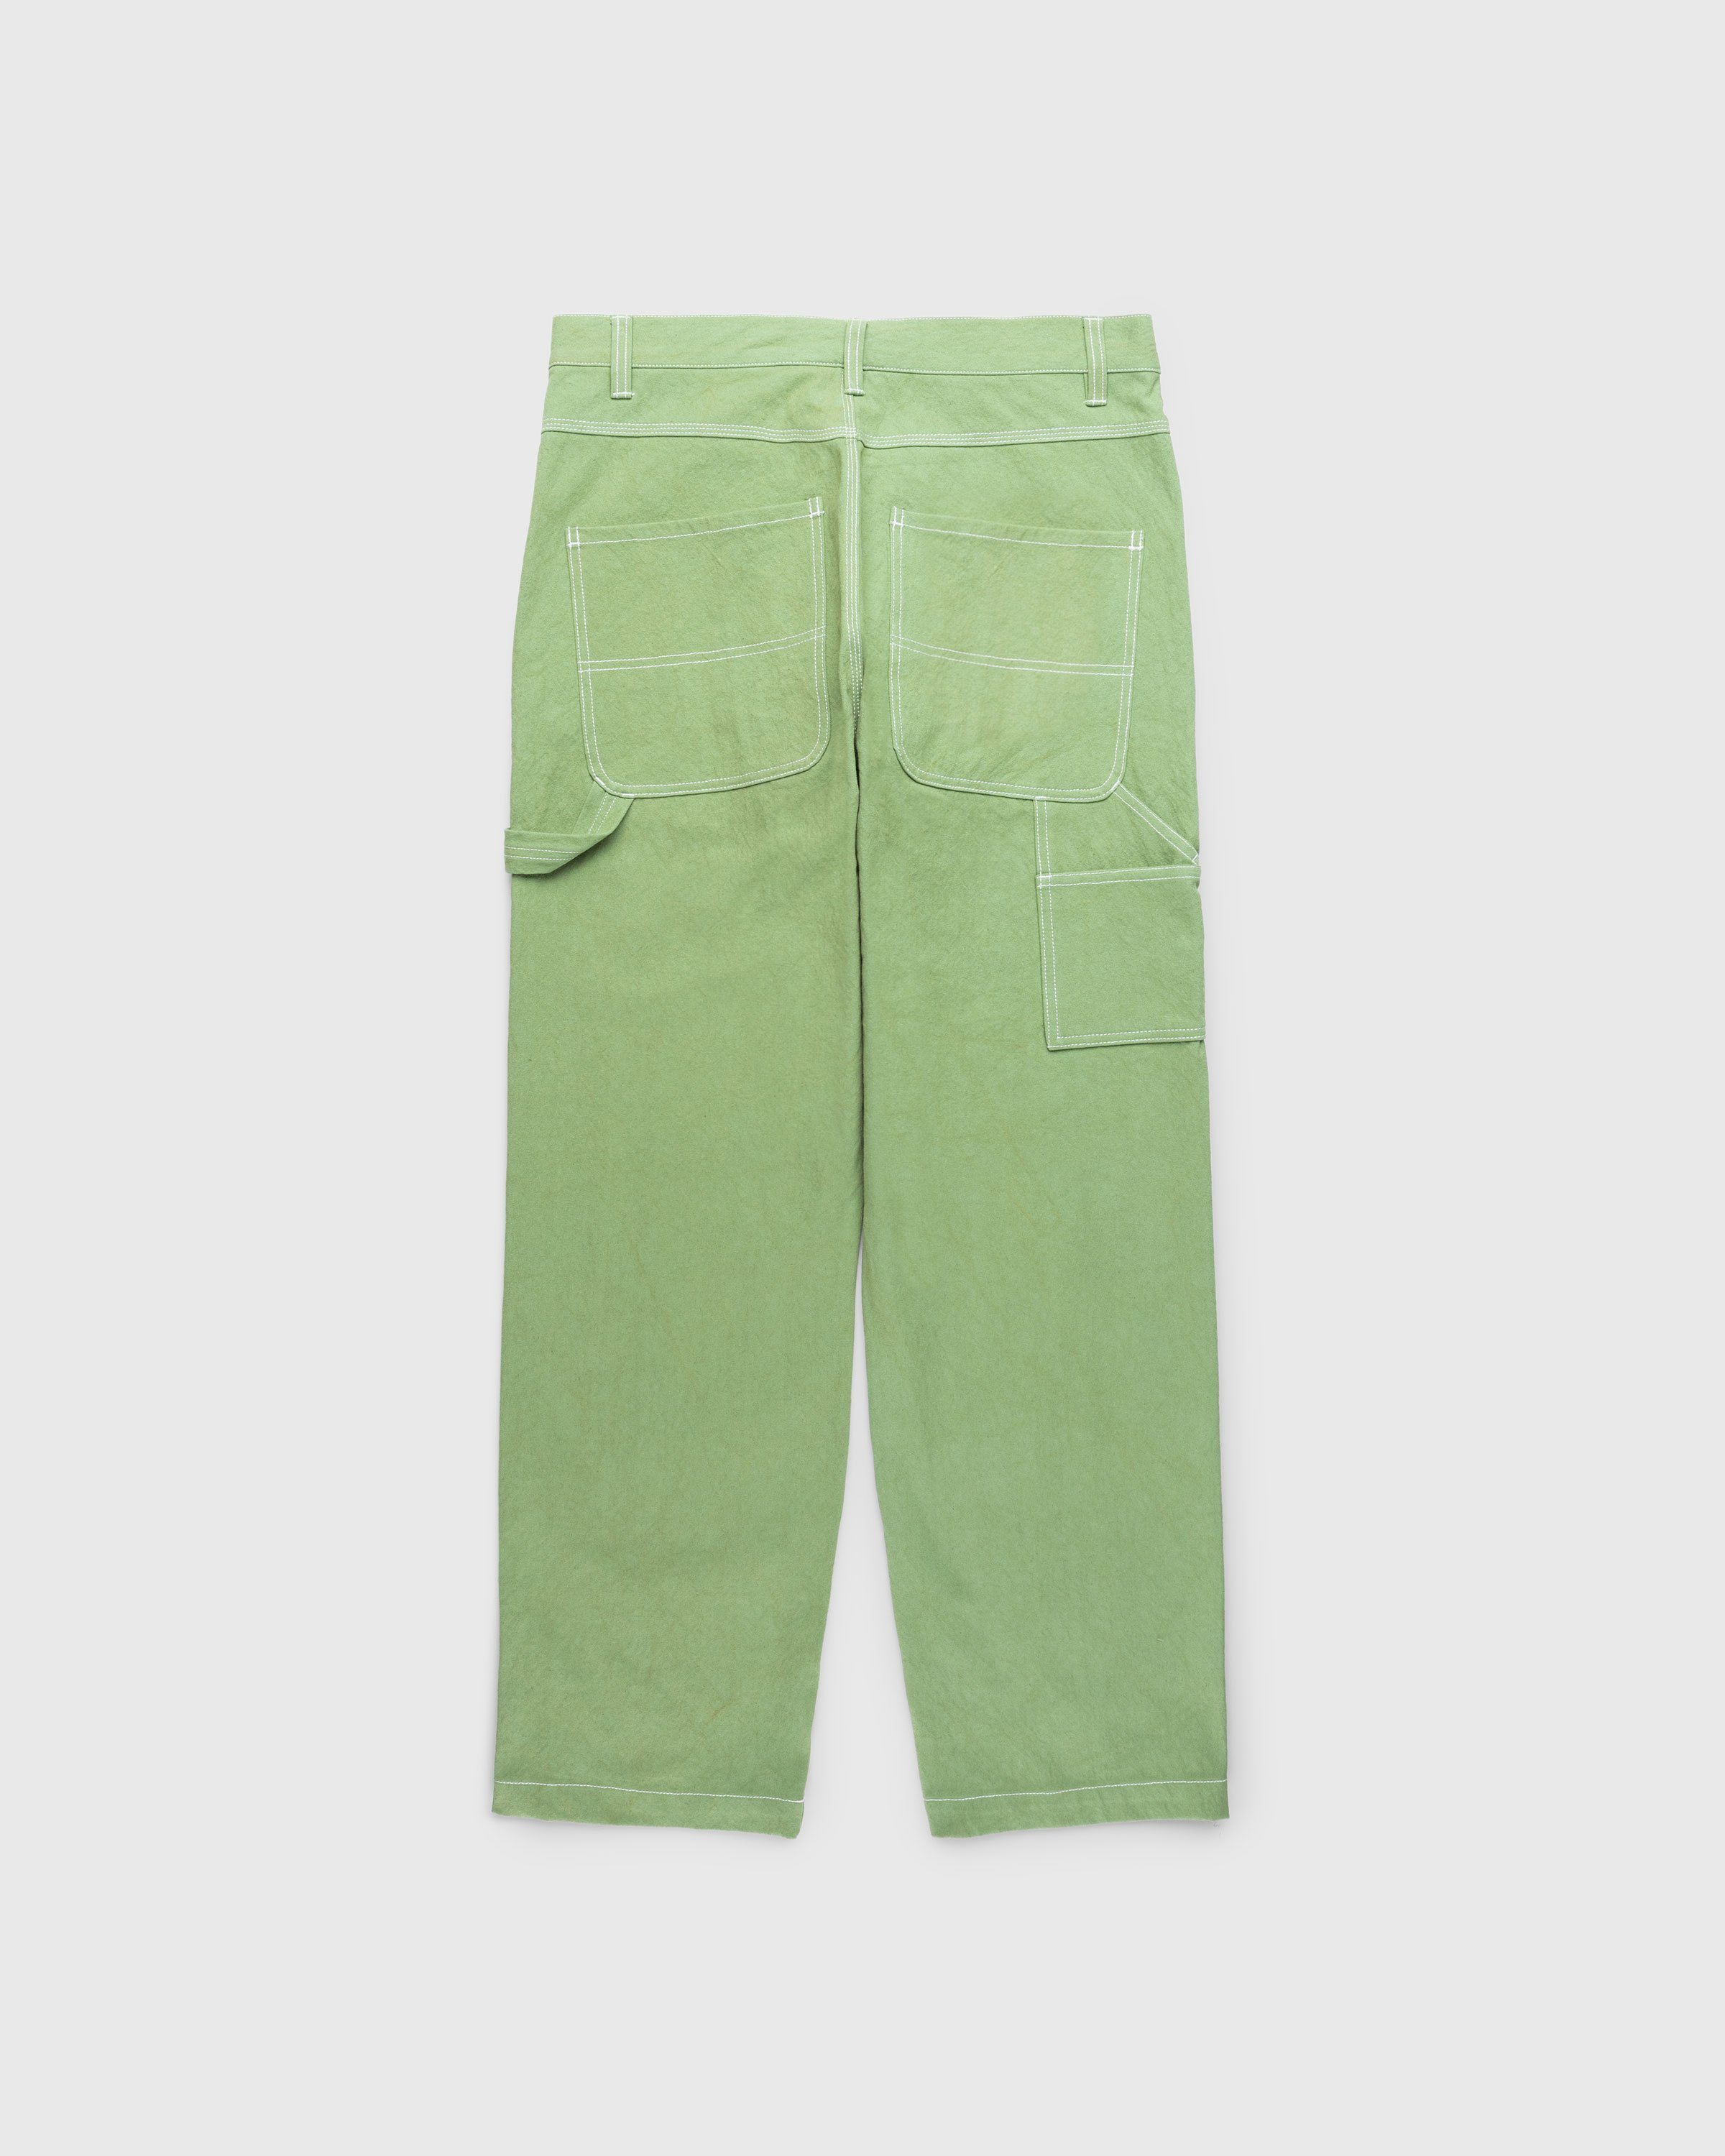 Highsnobiety HS05 - Sun Dried Canvas Carpenter Pants Green - Clothing - Green - Image 2